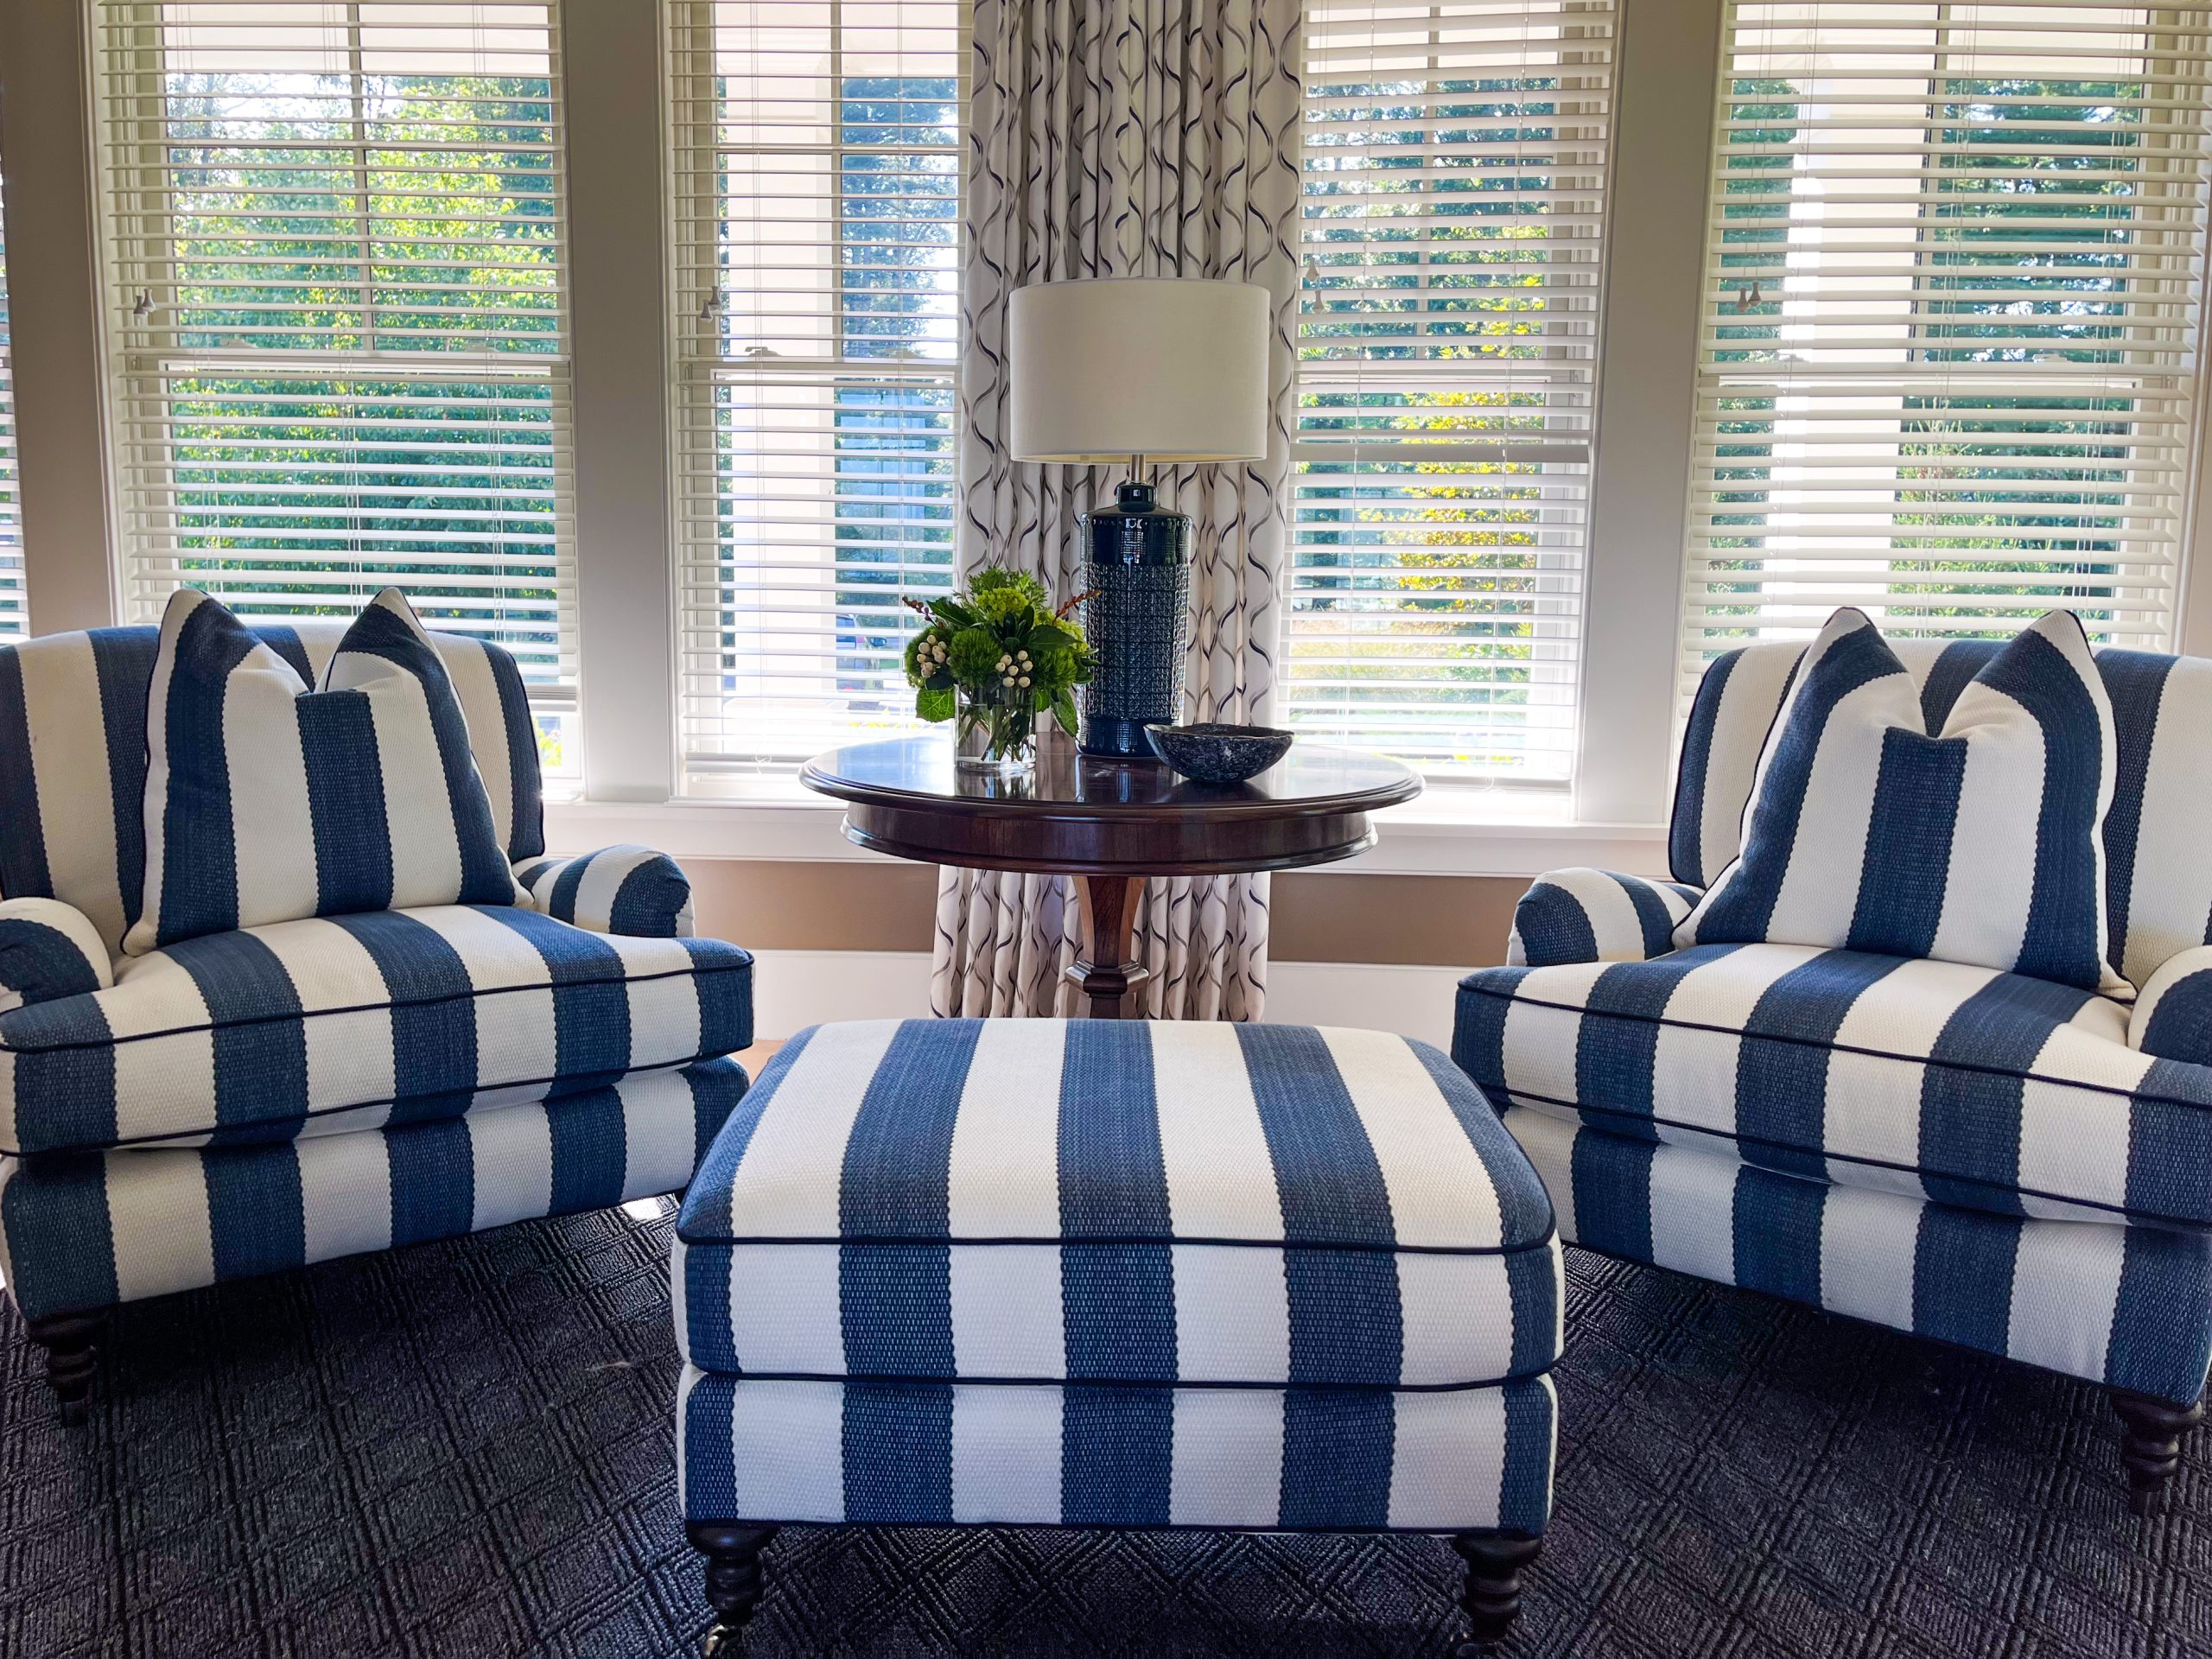 Navy blue and white striped armchairs and ottoman.